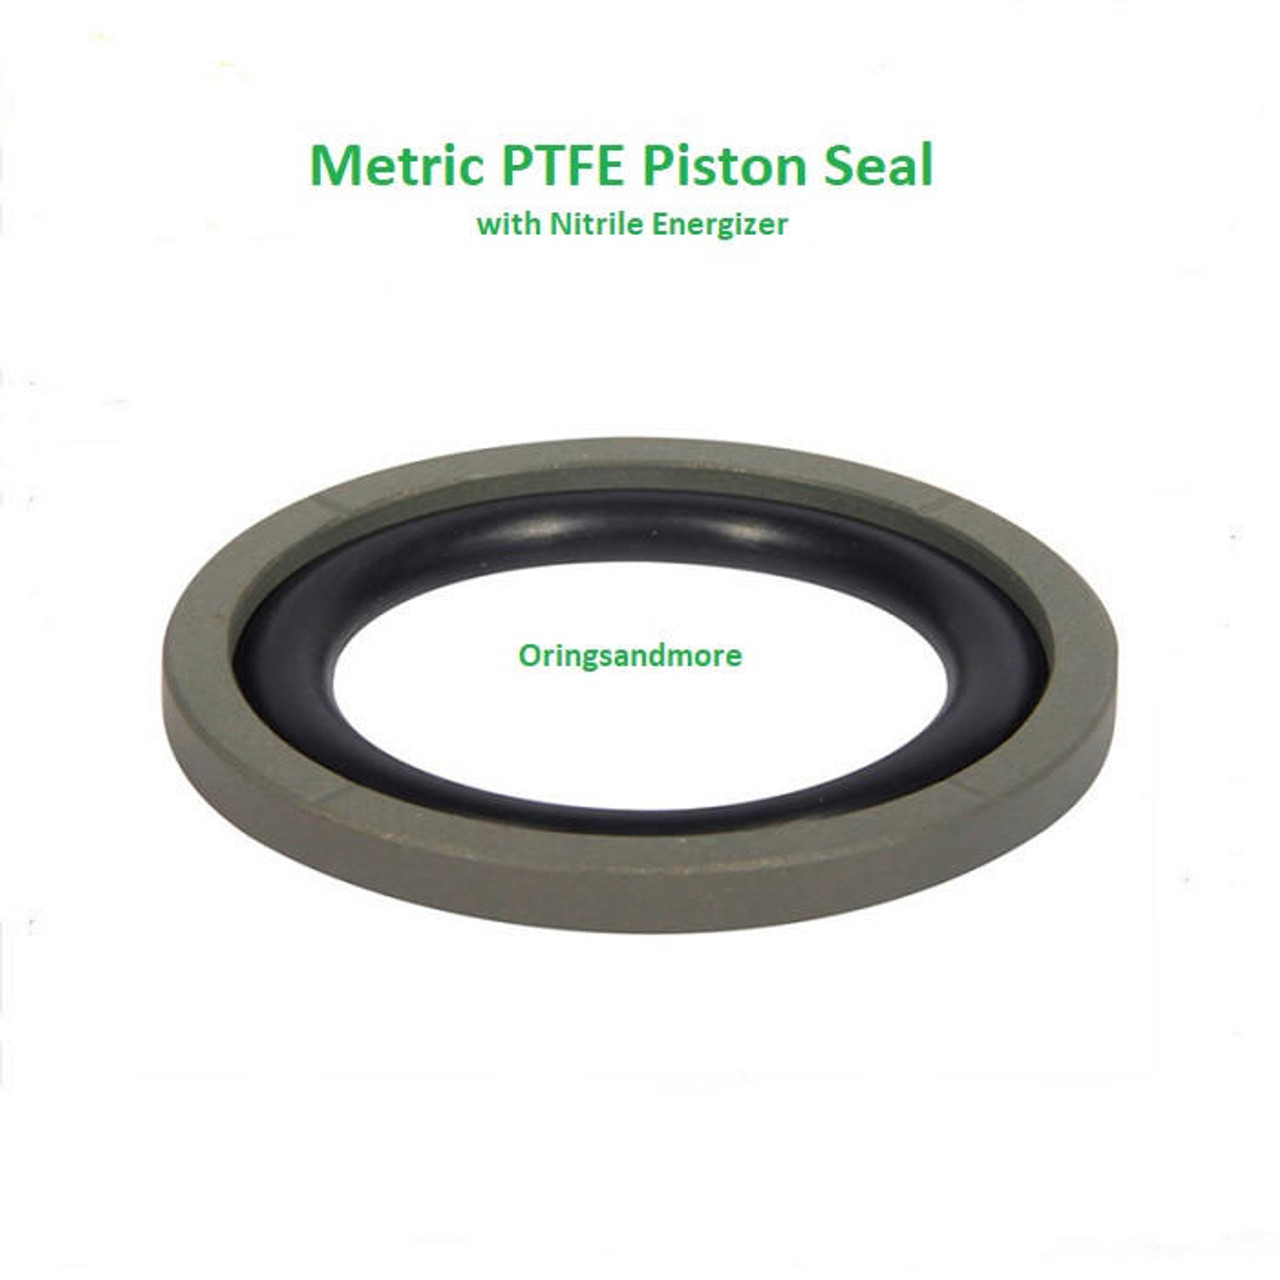 PTFE Piston Seal 105mm OD x 89.5mm ID x 6.3mm   Price for 1 pc